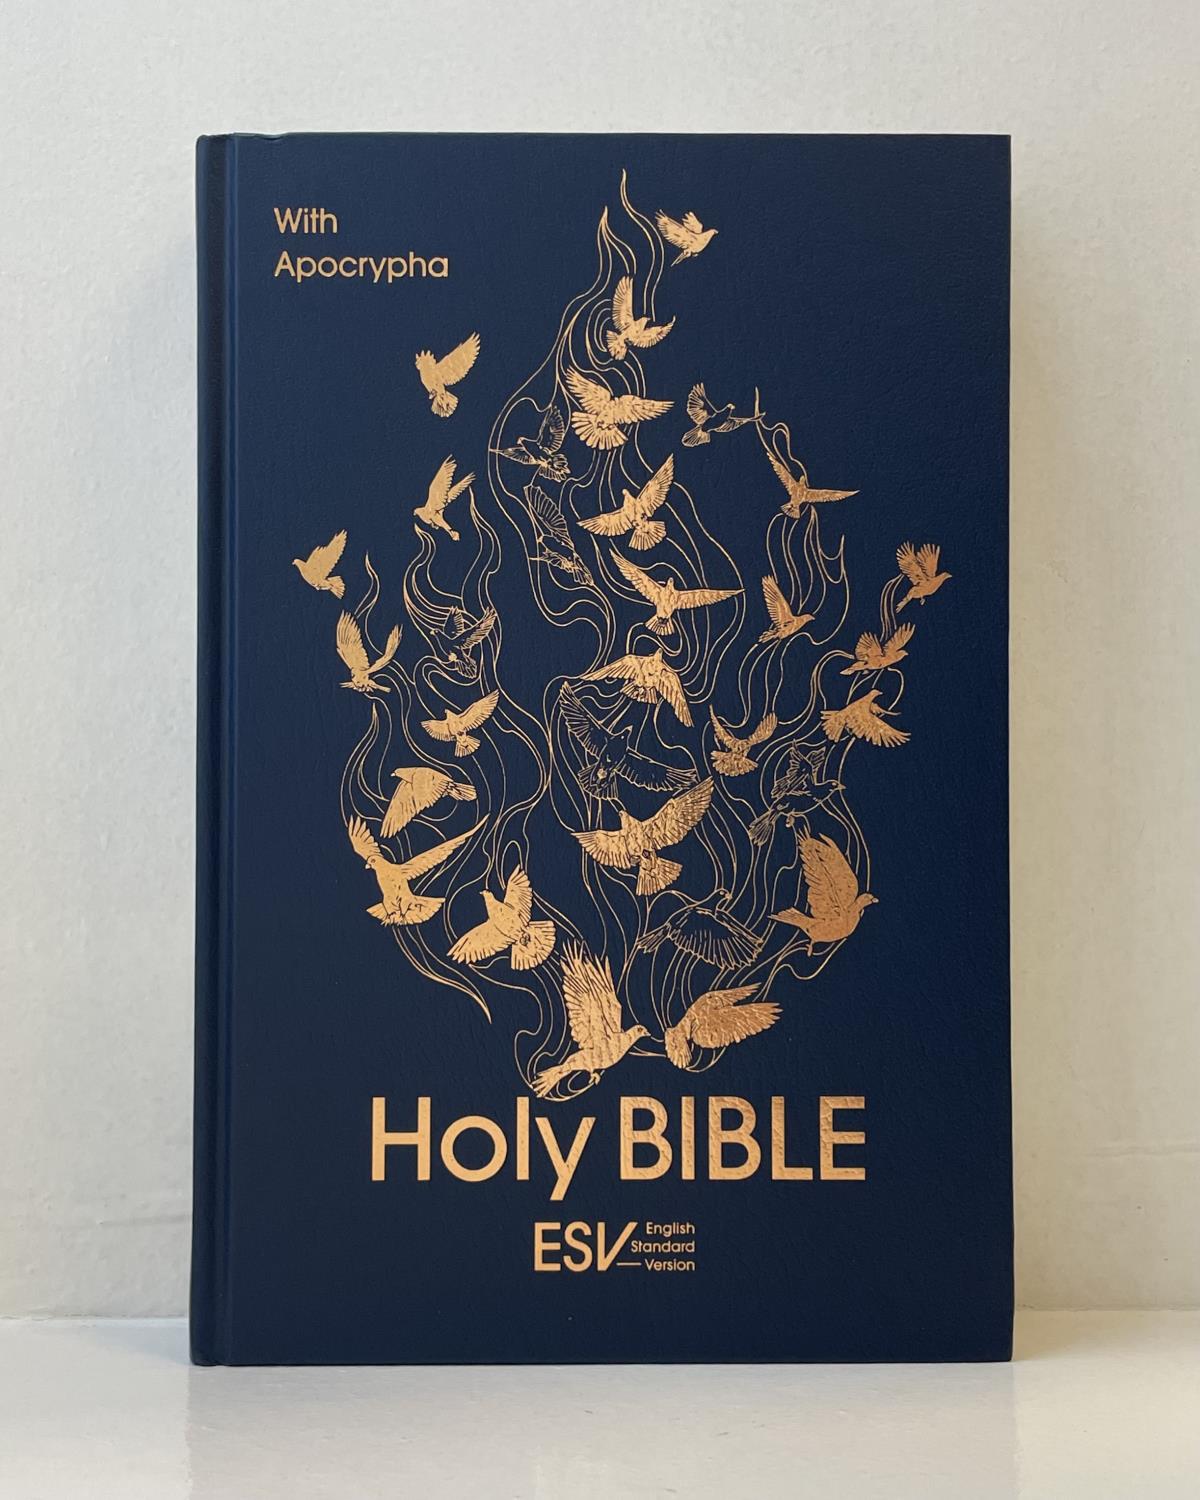 ESV Holy Bible with Apocrypha